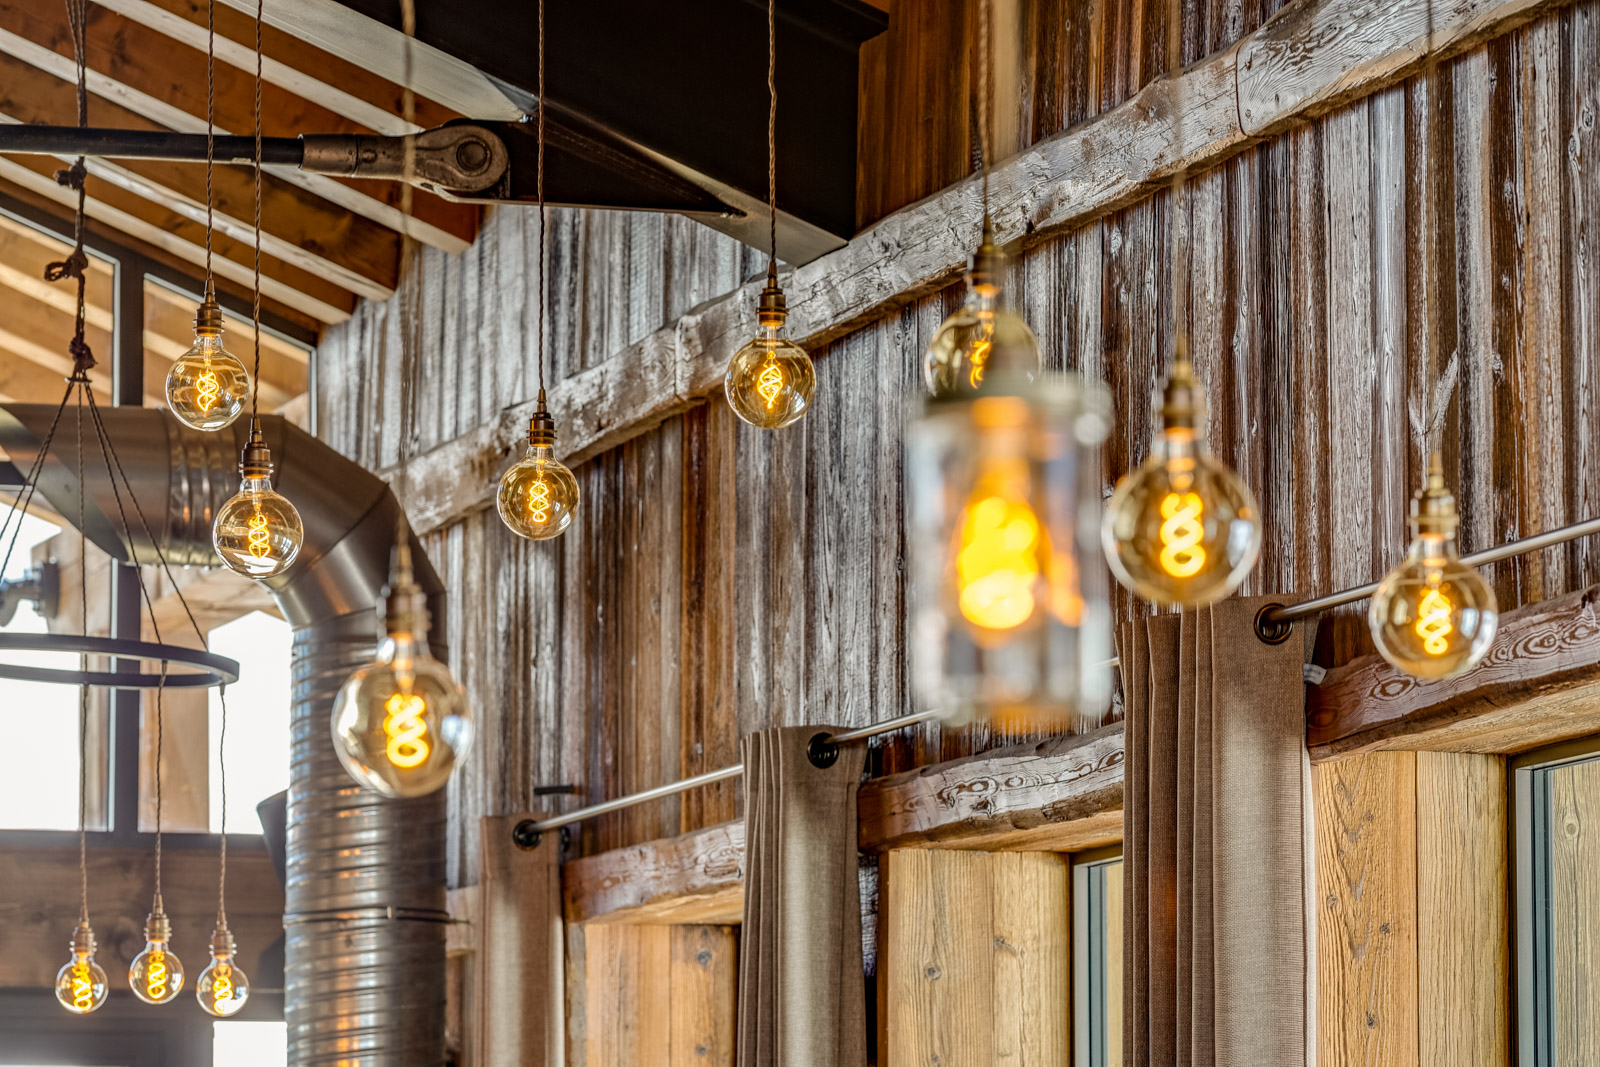 Lome vintage pendants with exposed Edison bulbs